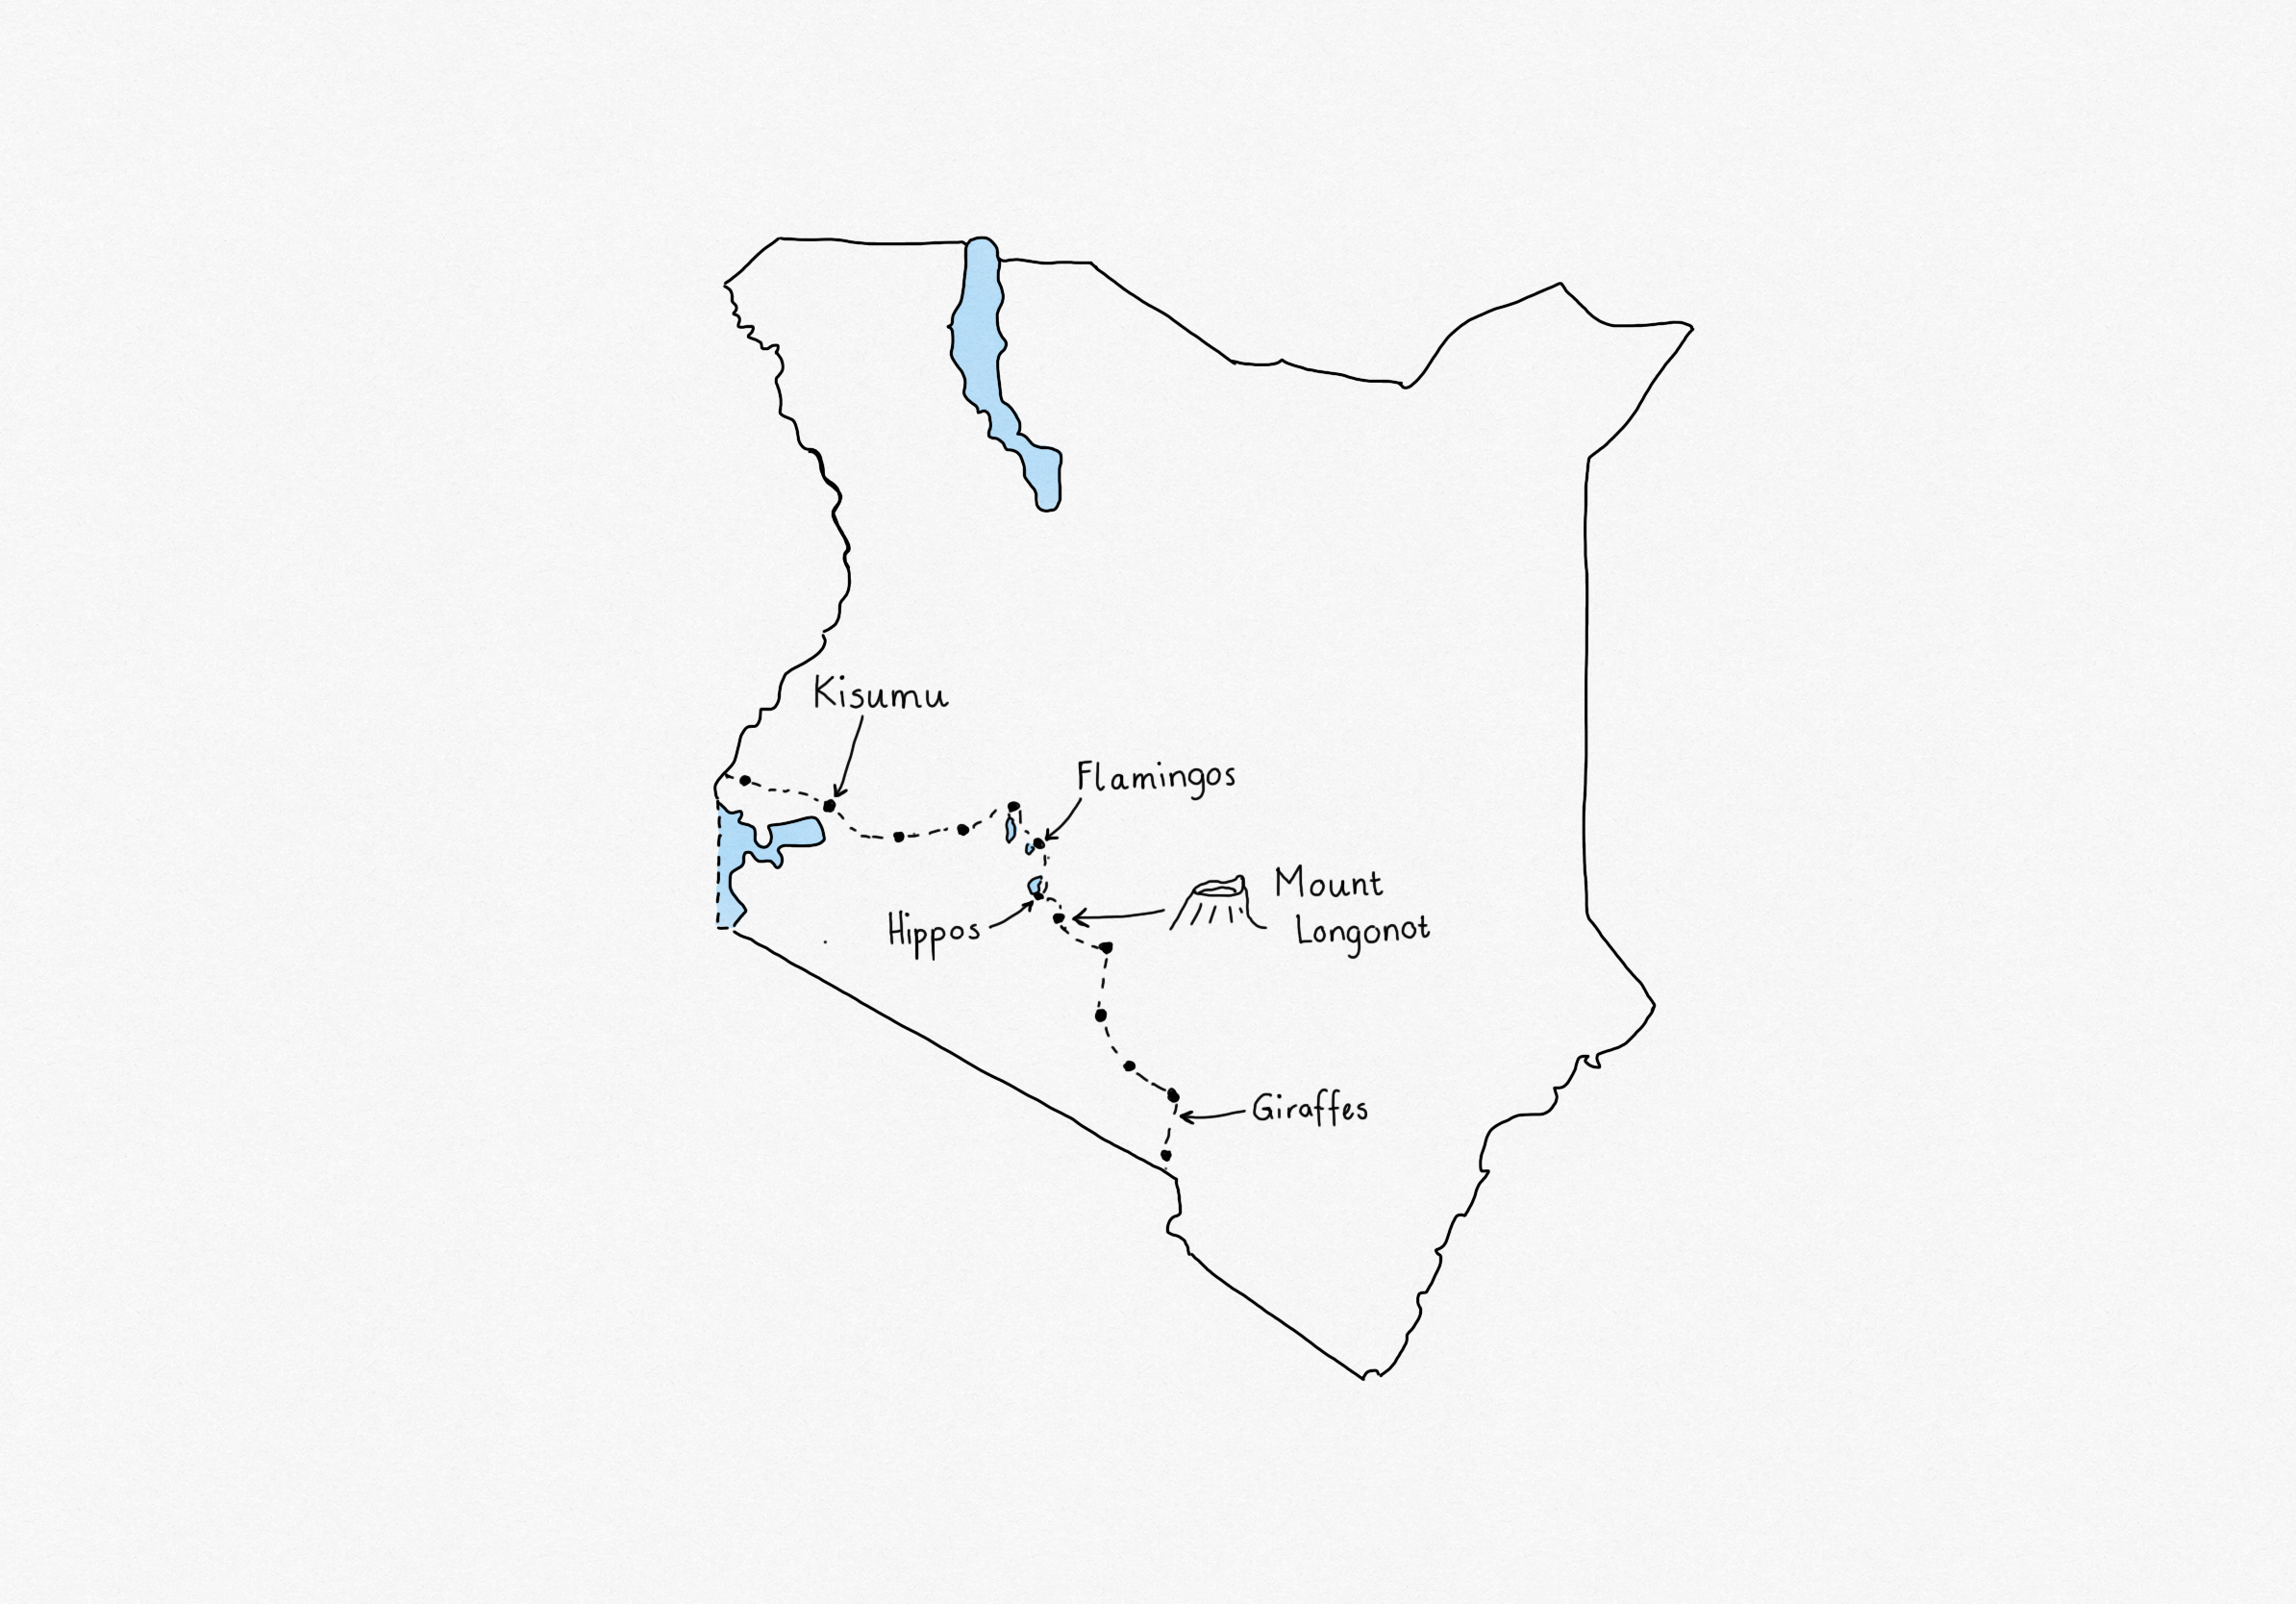 Our cycling route through Kenya